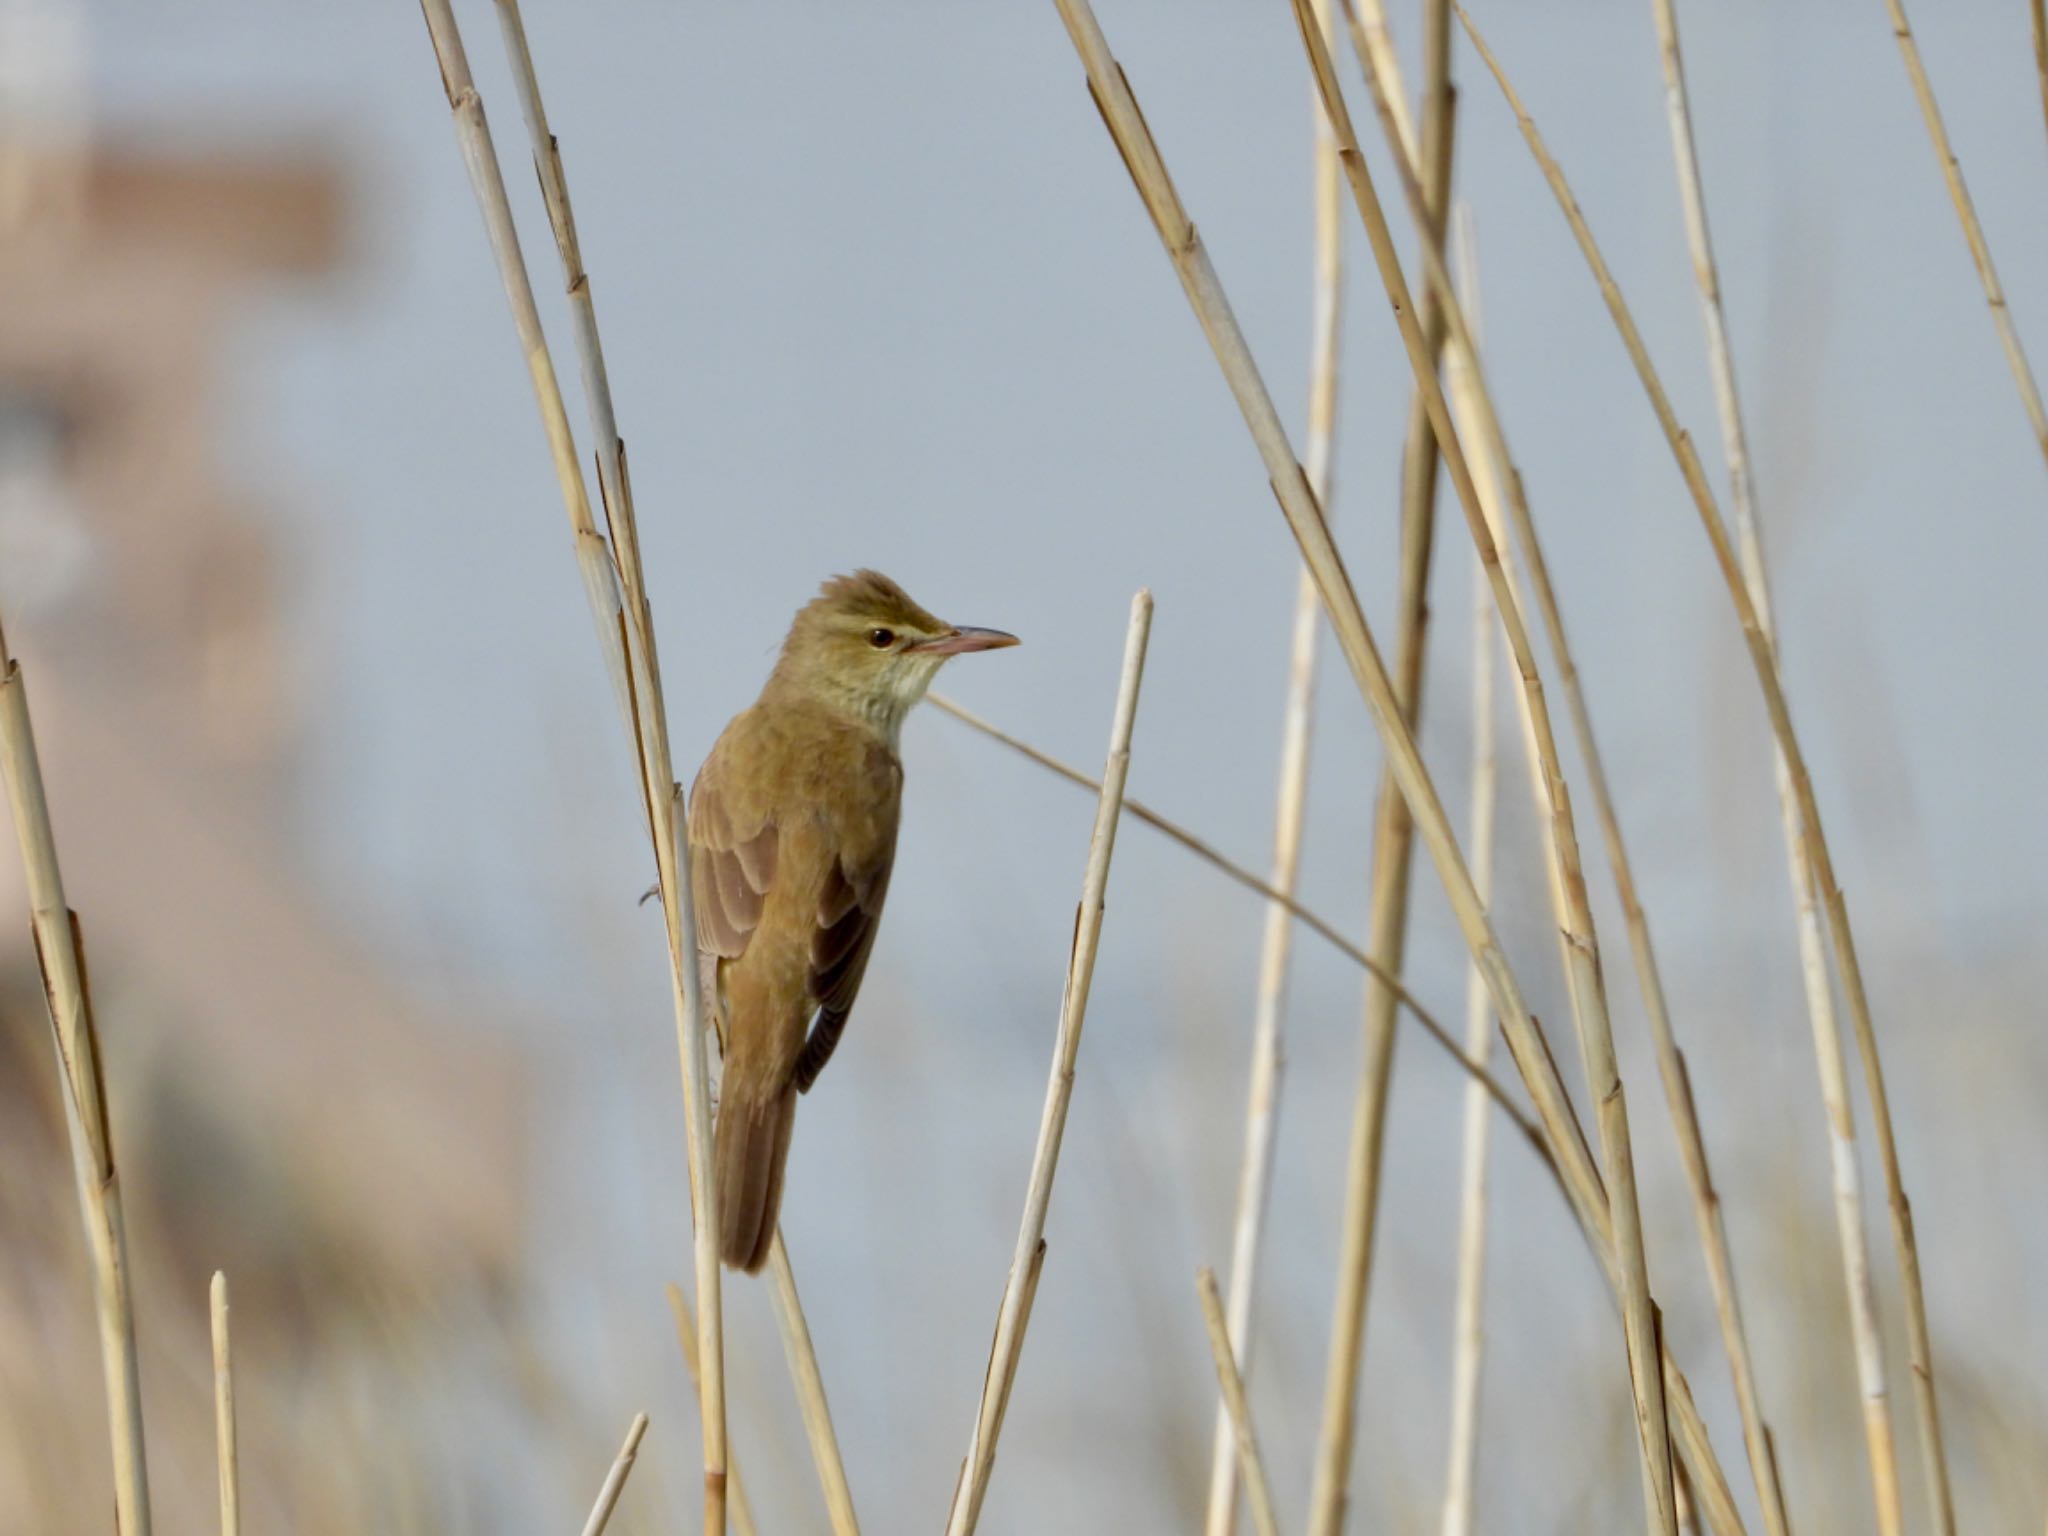 Photo of Oriental Reed Warbler at 春日部夢の森公園 by ShinyaYama